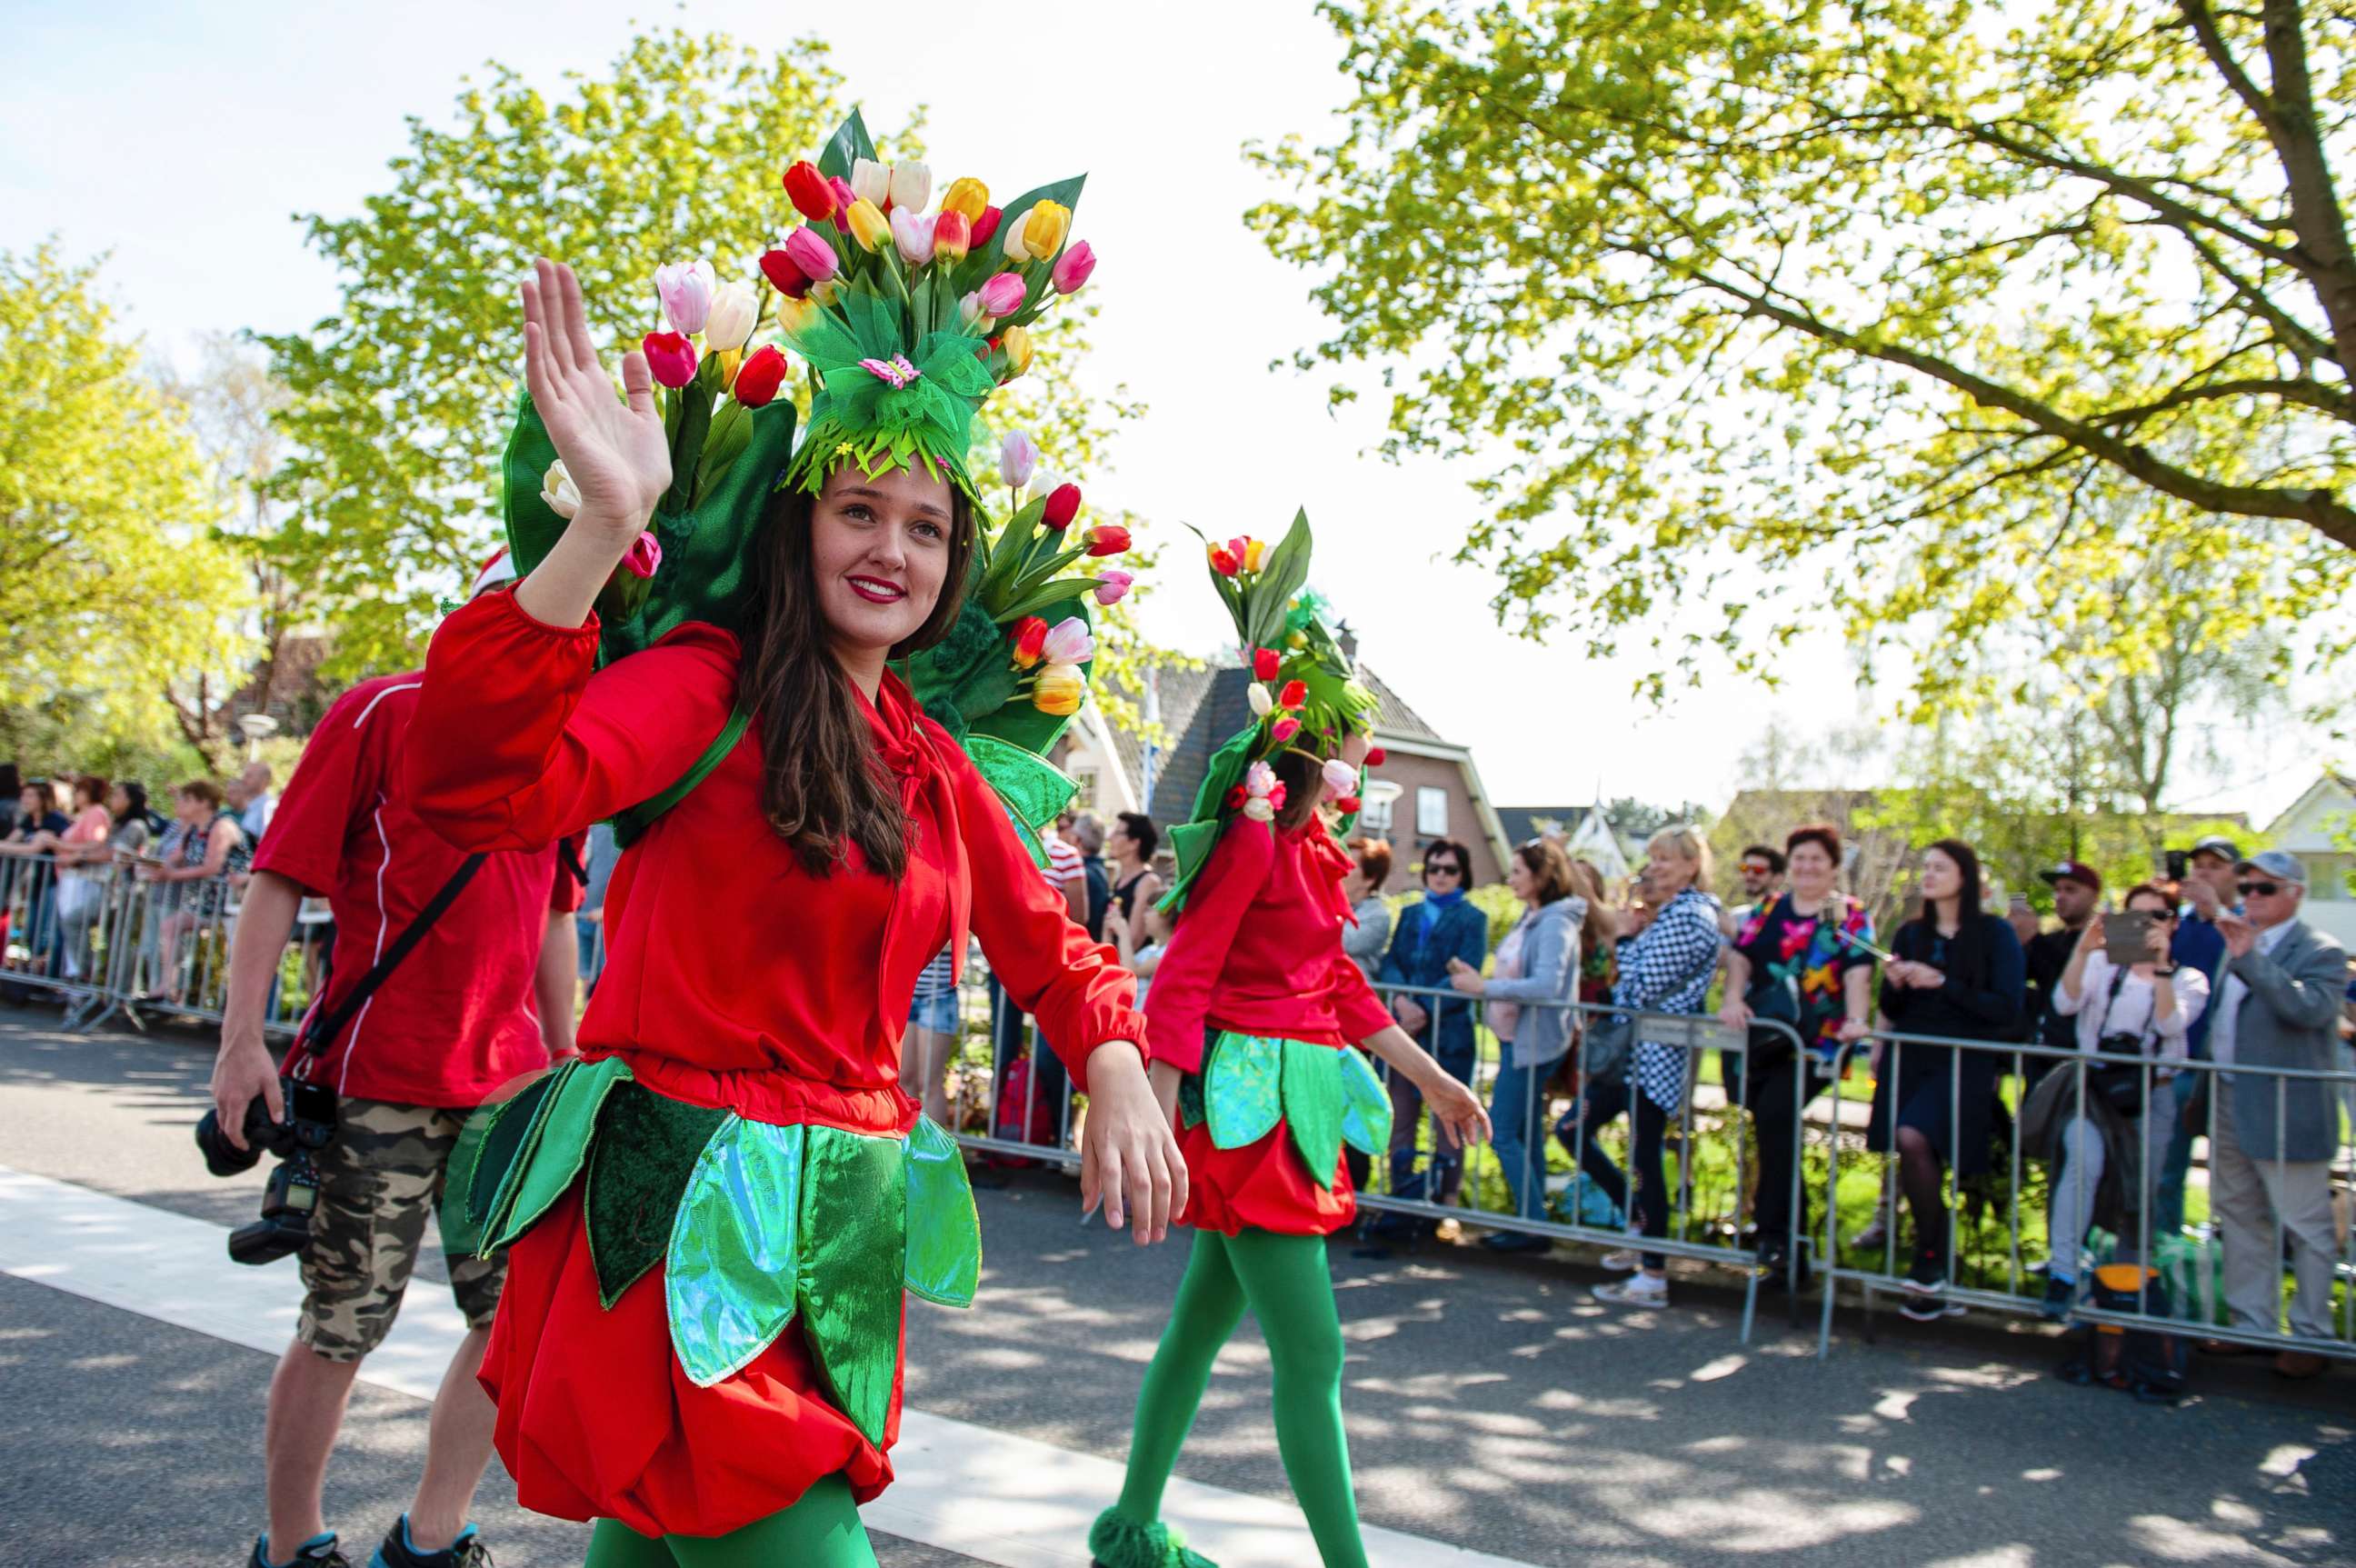 PHOTO: The 71st edition of the Bollenstreek (bulb growing area) Bloemencorso will follow a 25 mile route from Noordwijk to Haarlem, April 21, 2018, Lisse, The Netherlands.